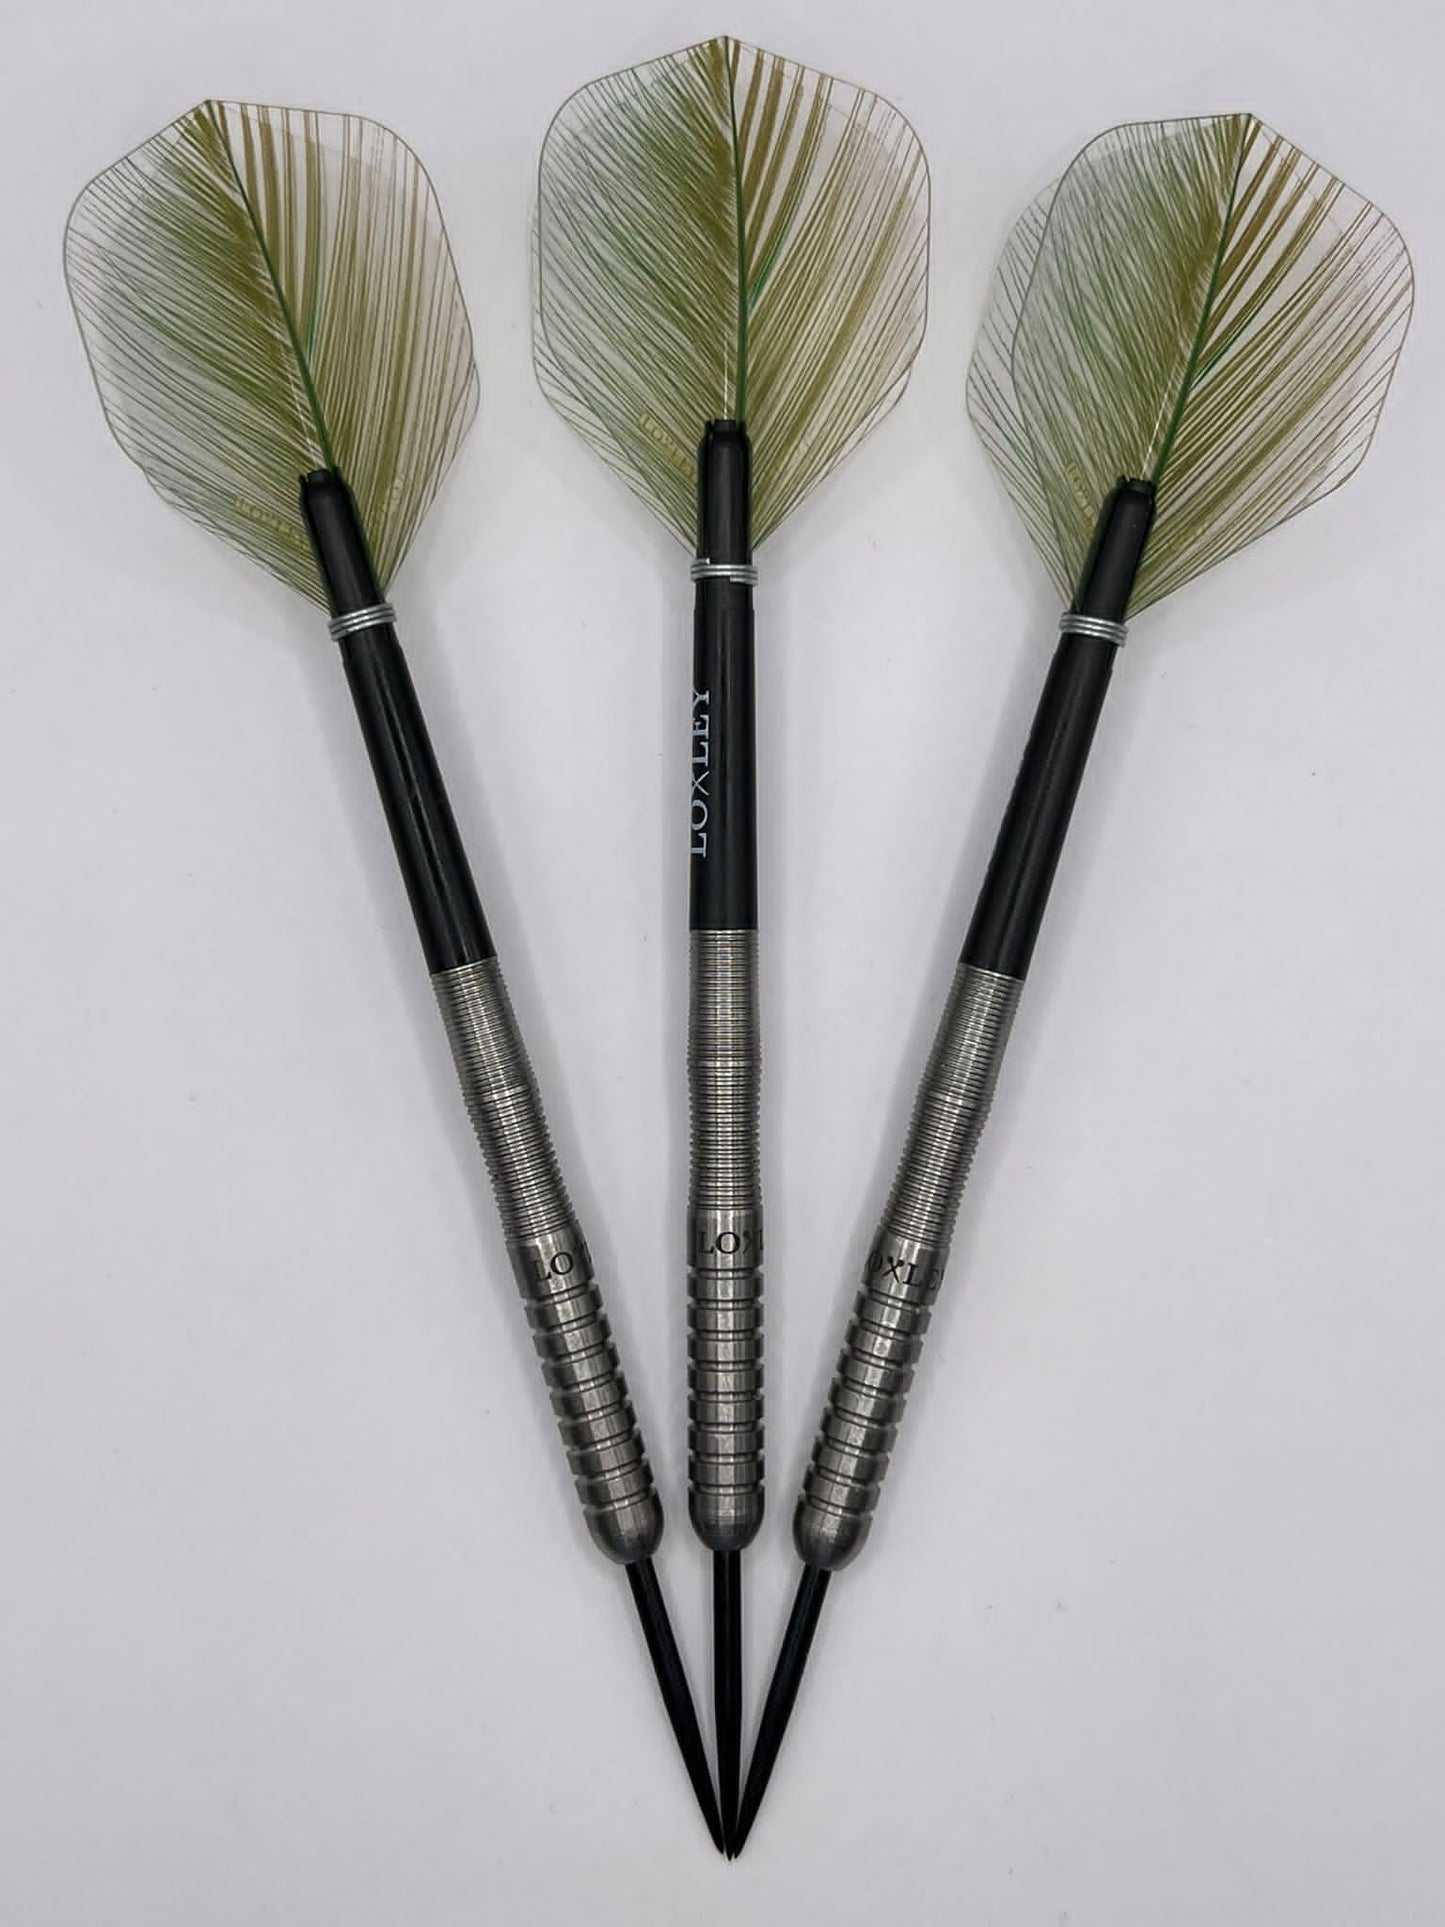 LOXLEY - Loxley 'Sorcerer' - 21g & 23g